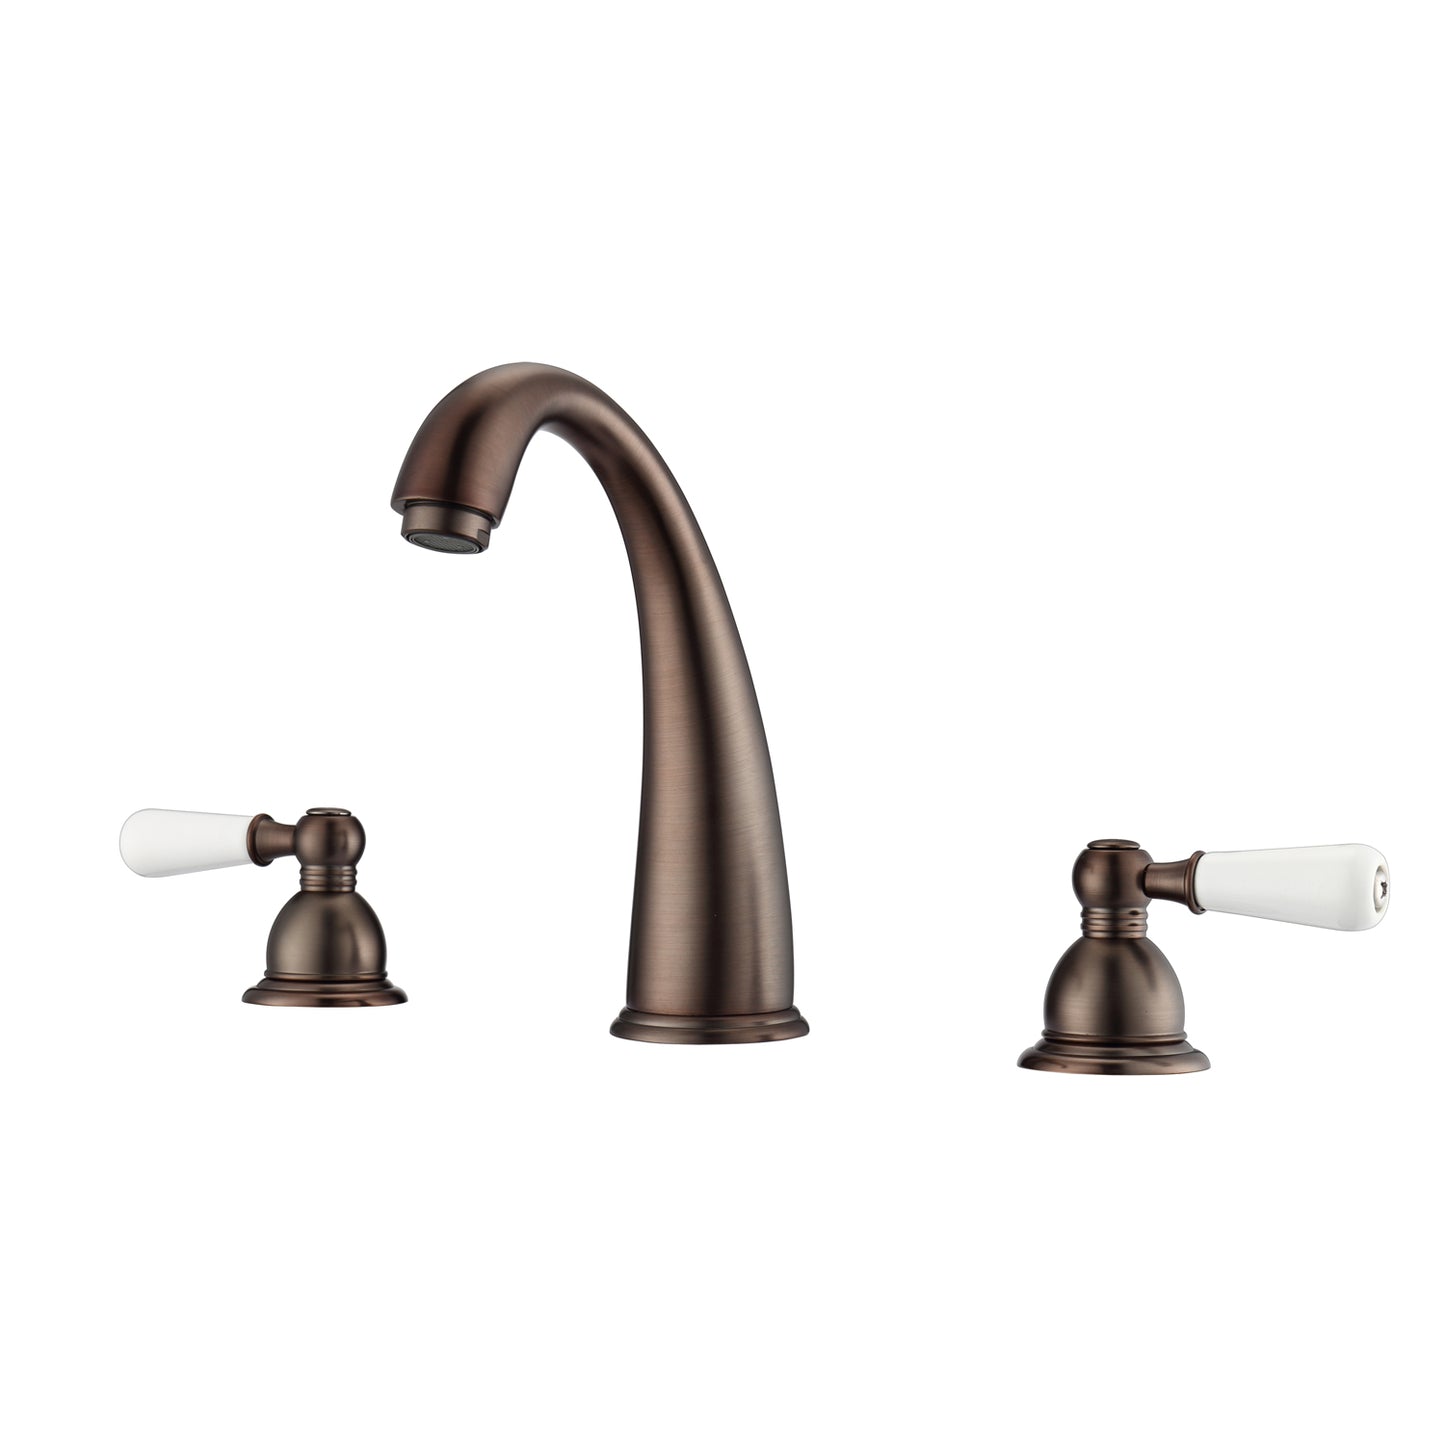 Maddox 8" Widespread Oil Rubbed Bronze Bathroom Faucet with Porcelain Lever Handles